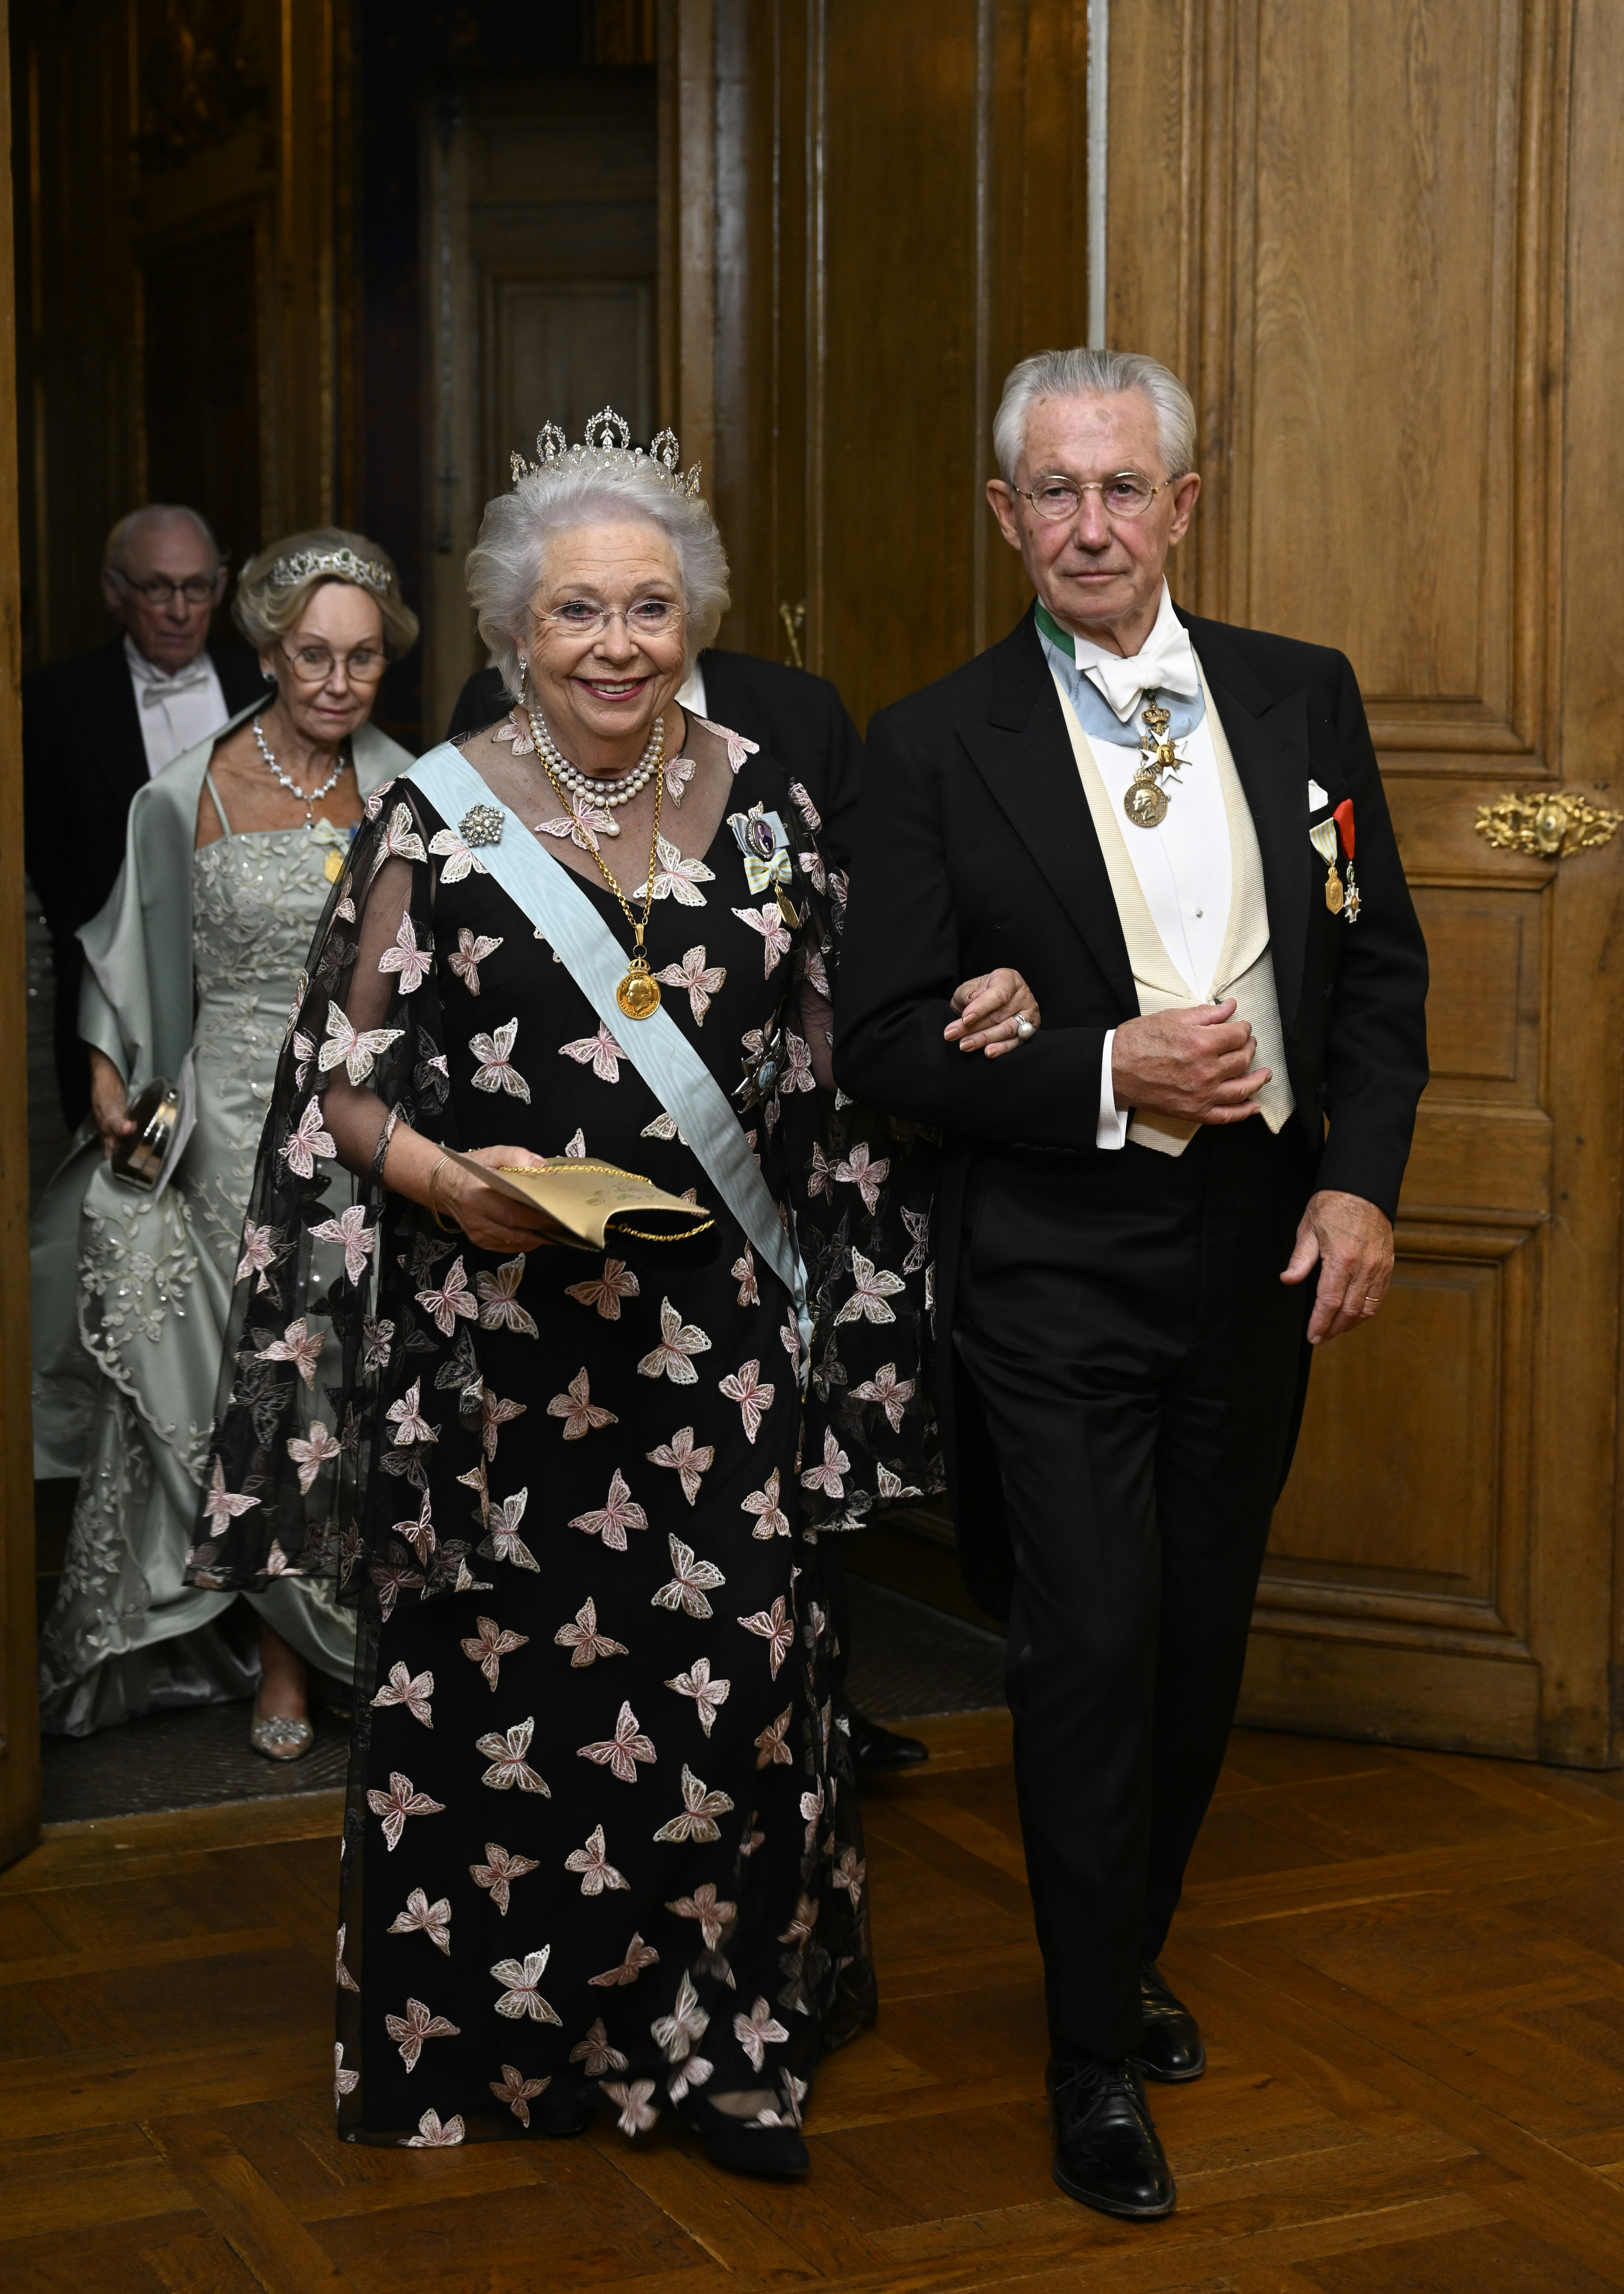 Sweden's Princess Christina, Mrs Magnuson and Consul General Tord Magnuson arrive at the Jubilee dinner at the Royal Palace in Stockholm, Sweden, on September 15, 2023, in connection with the 50th anniversary of HM the King's accession to the throne. Photo: Fredrik Sandberg / TT / code 10080